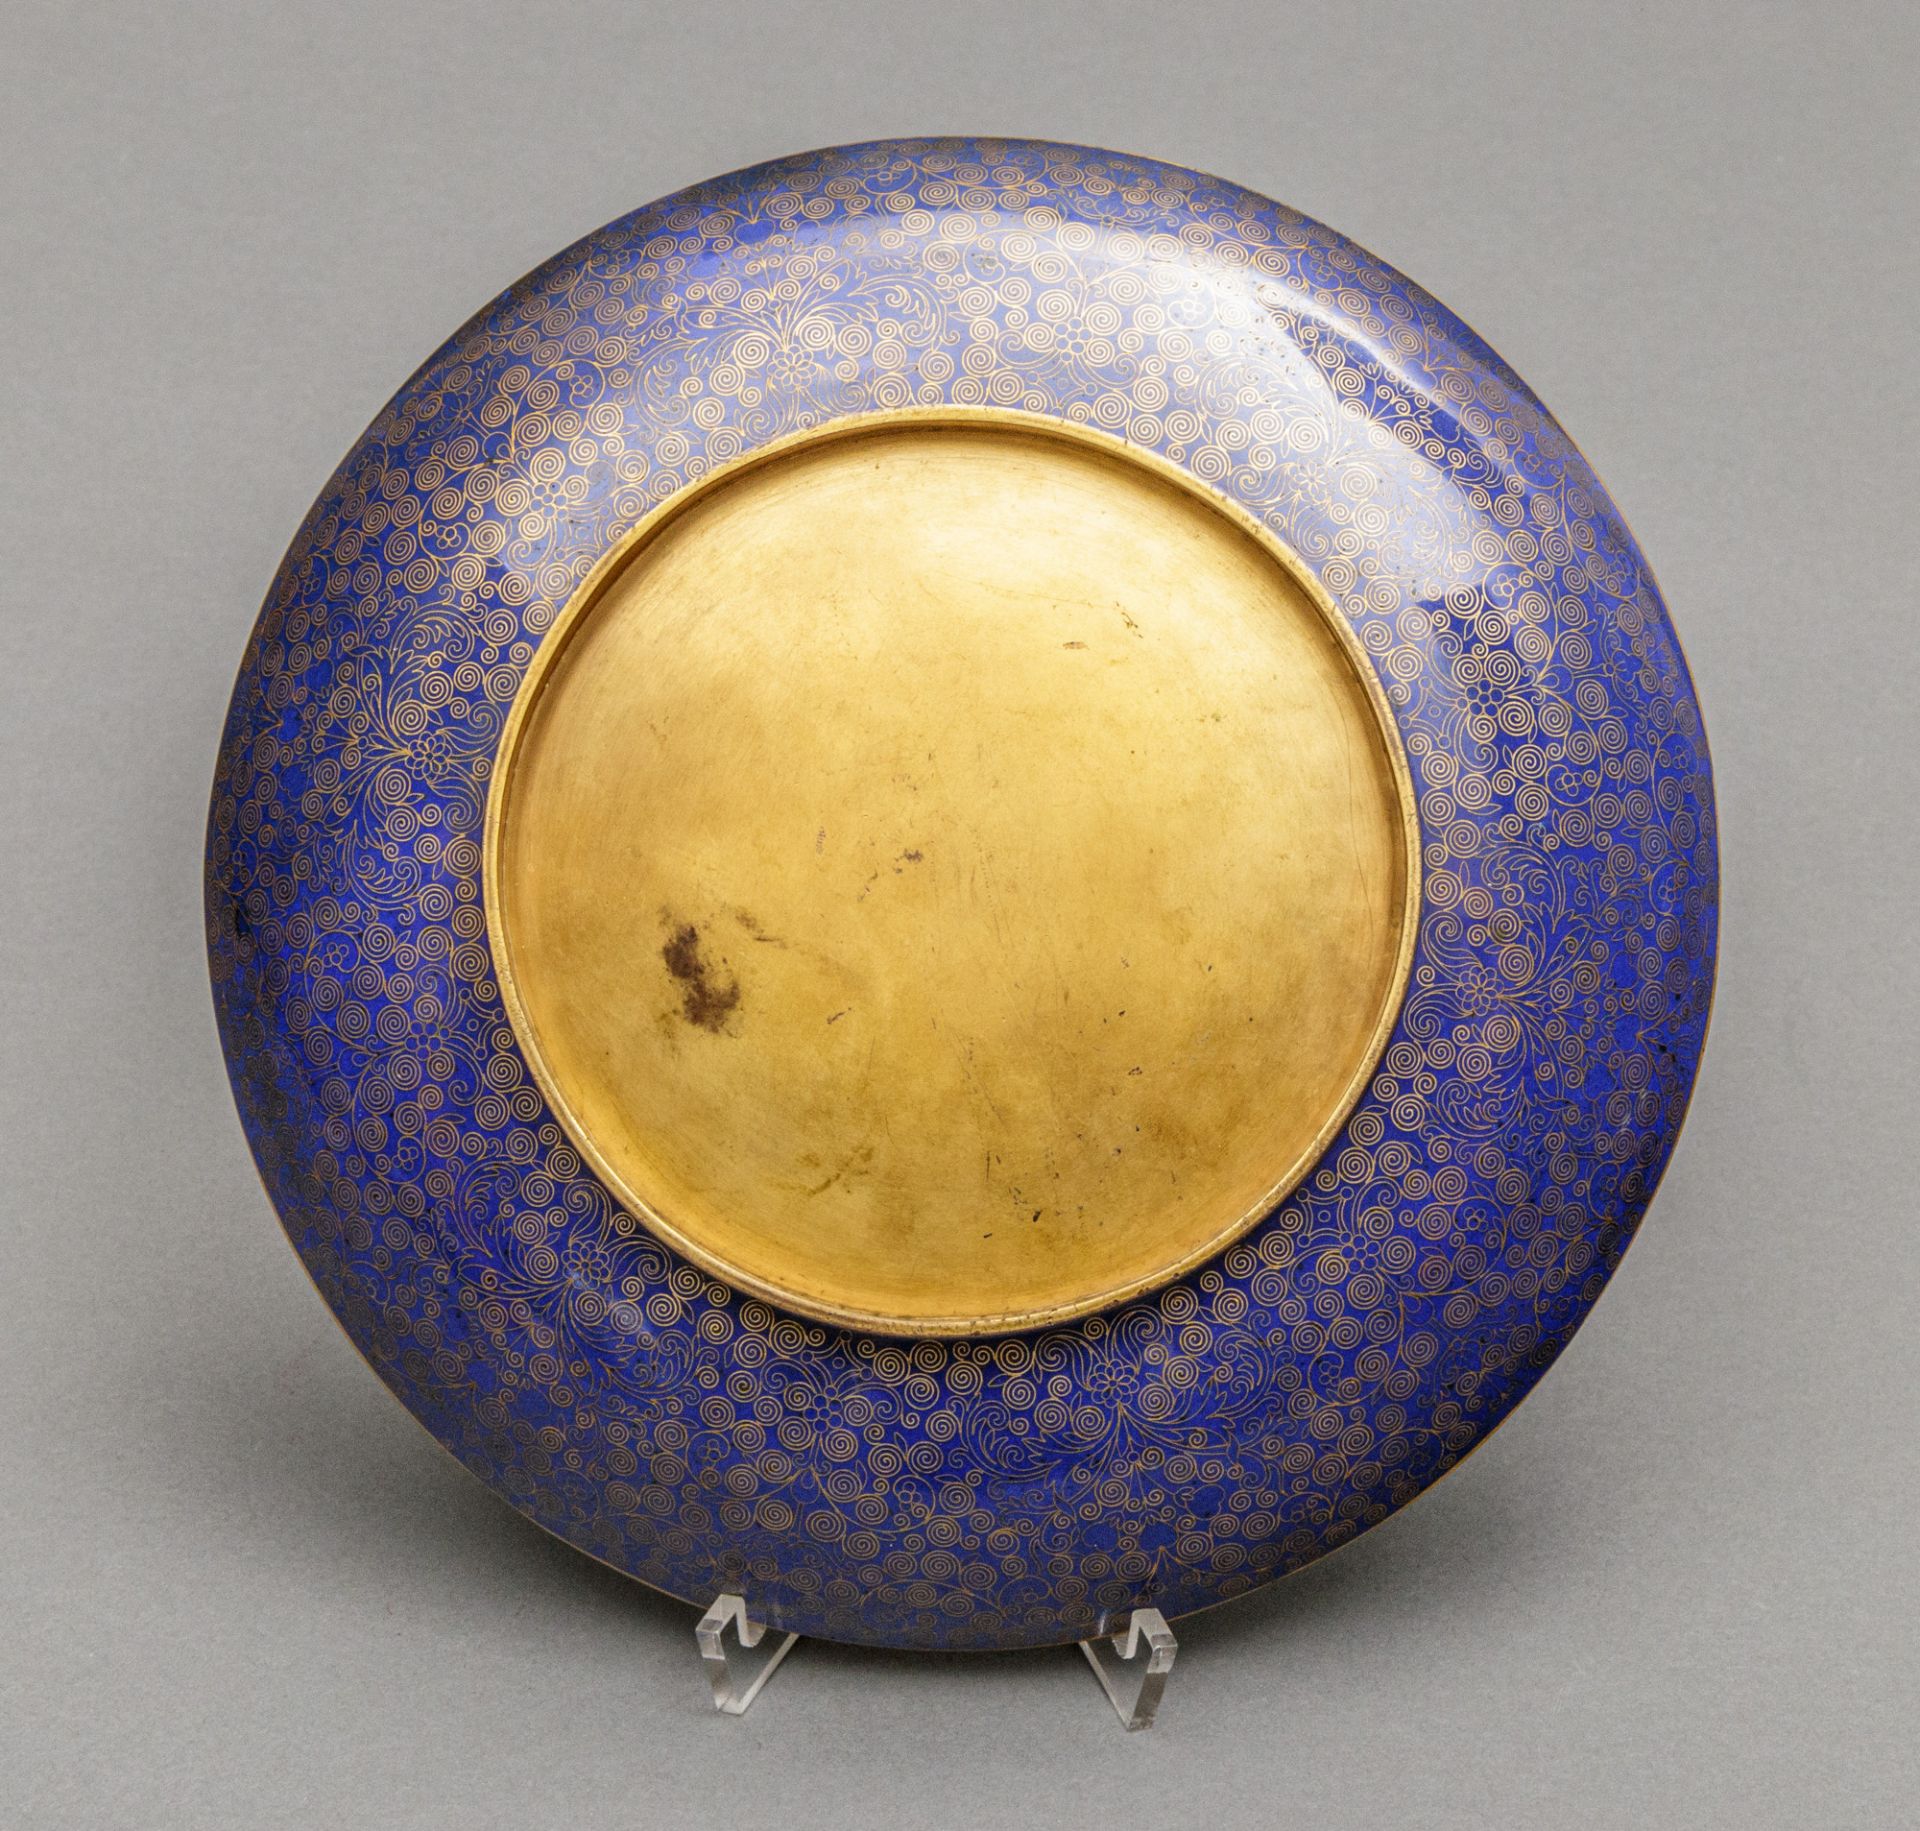 Paar Cloisonné Teller, China, wohl Qing Dynastie, 1644-1911 - Image 2 of 5